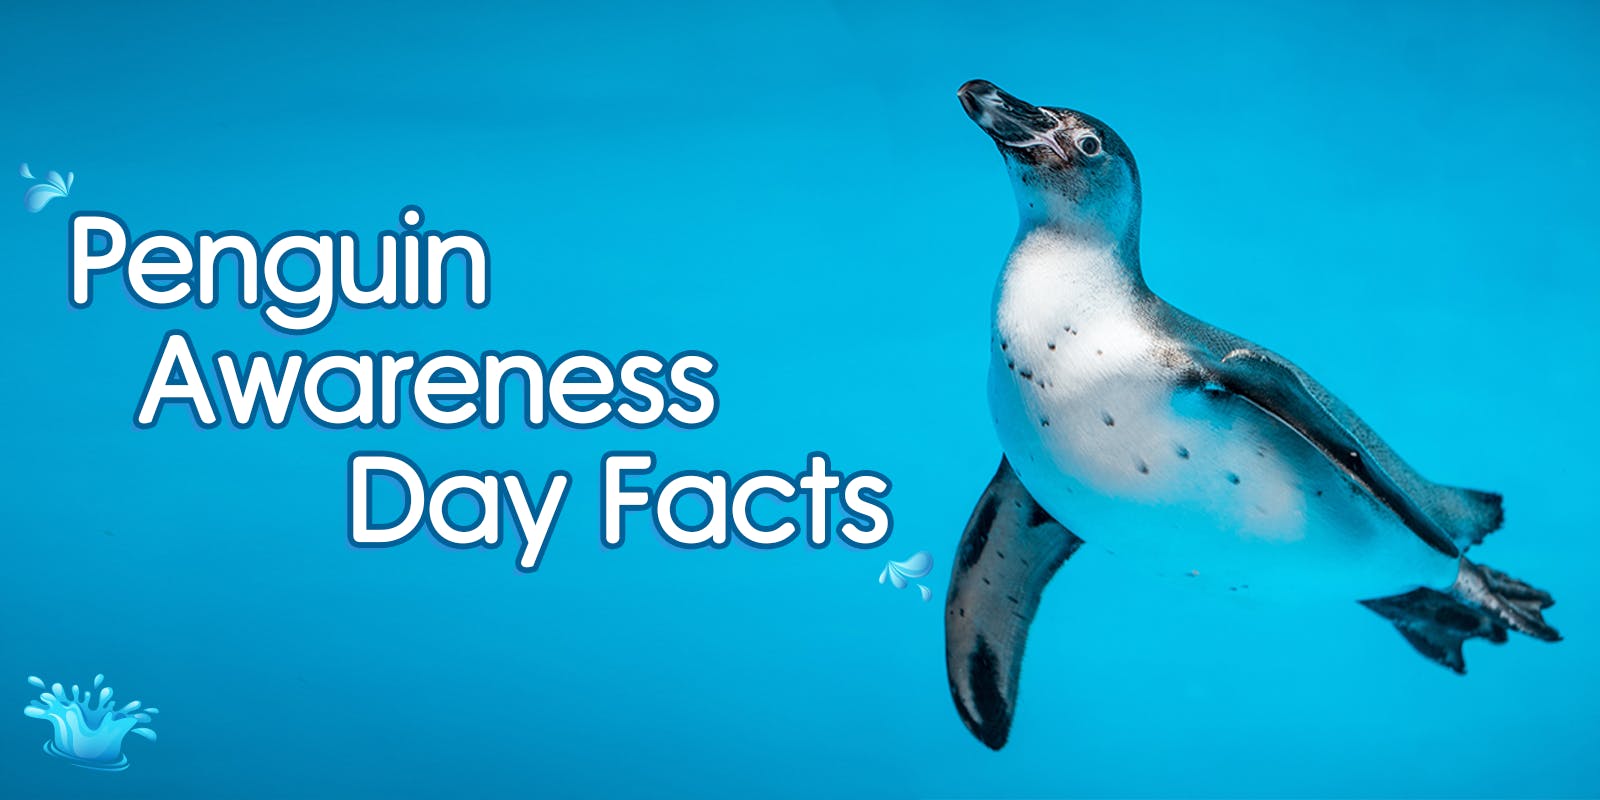 Penguin Awareness Day facts